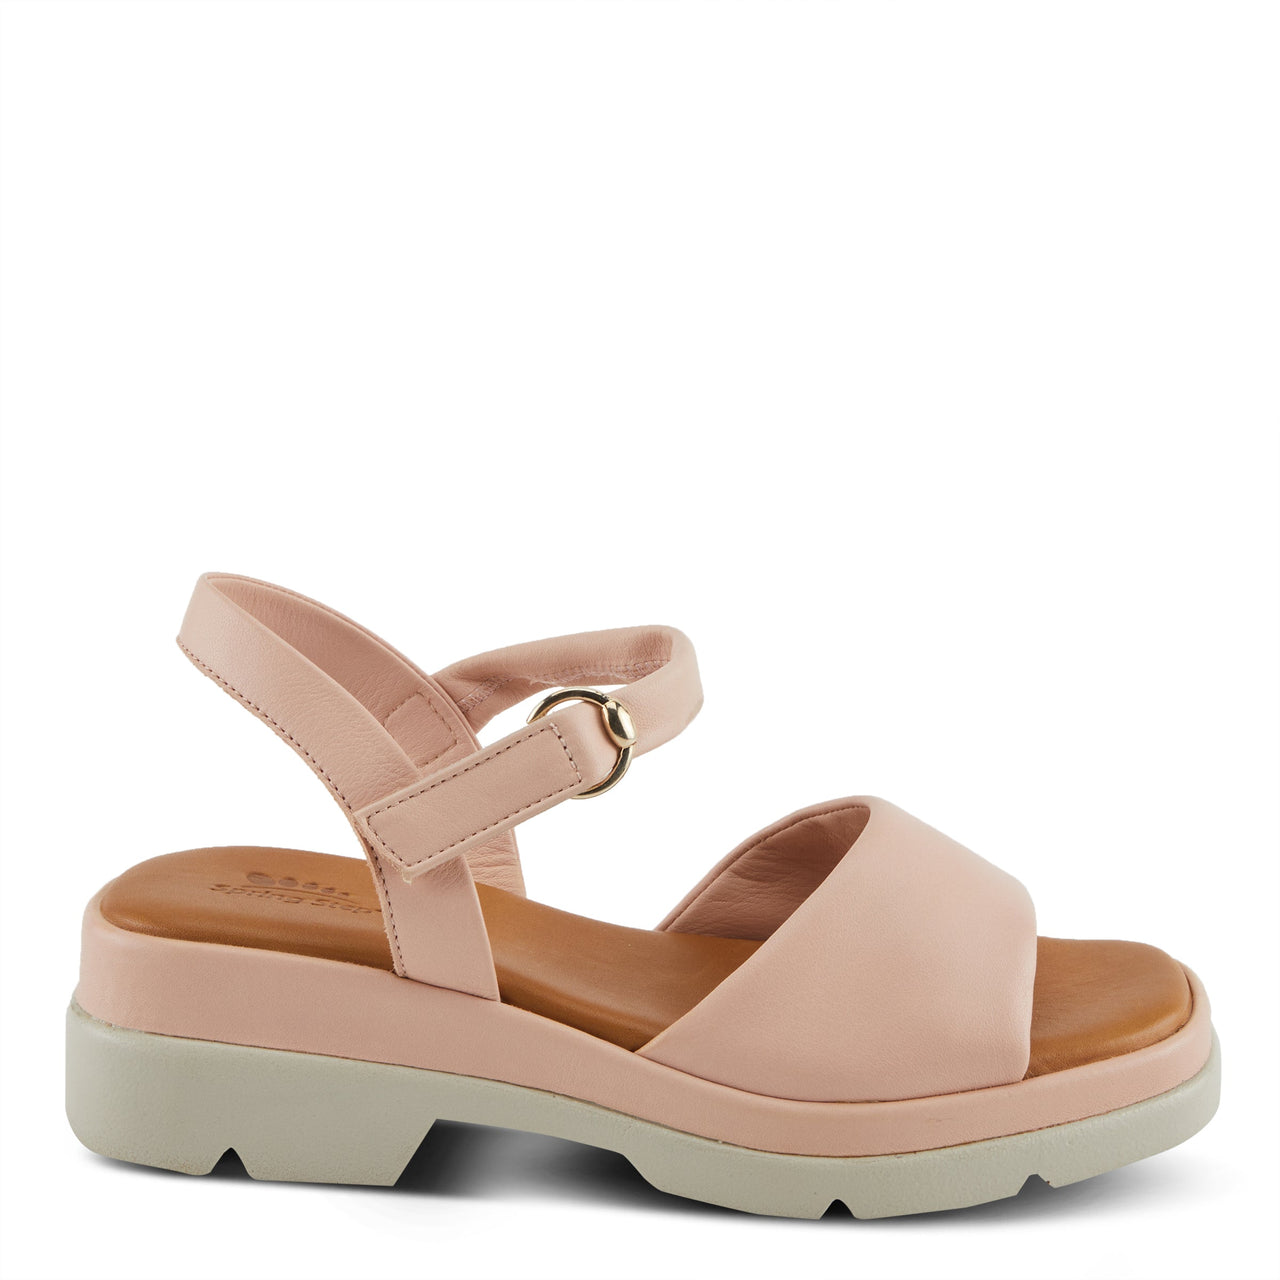 Cushioned and supportive Spring Step Huntington Sandals with cork insole